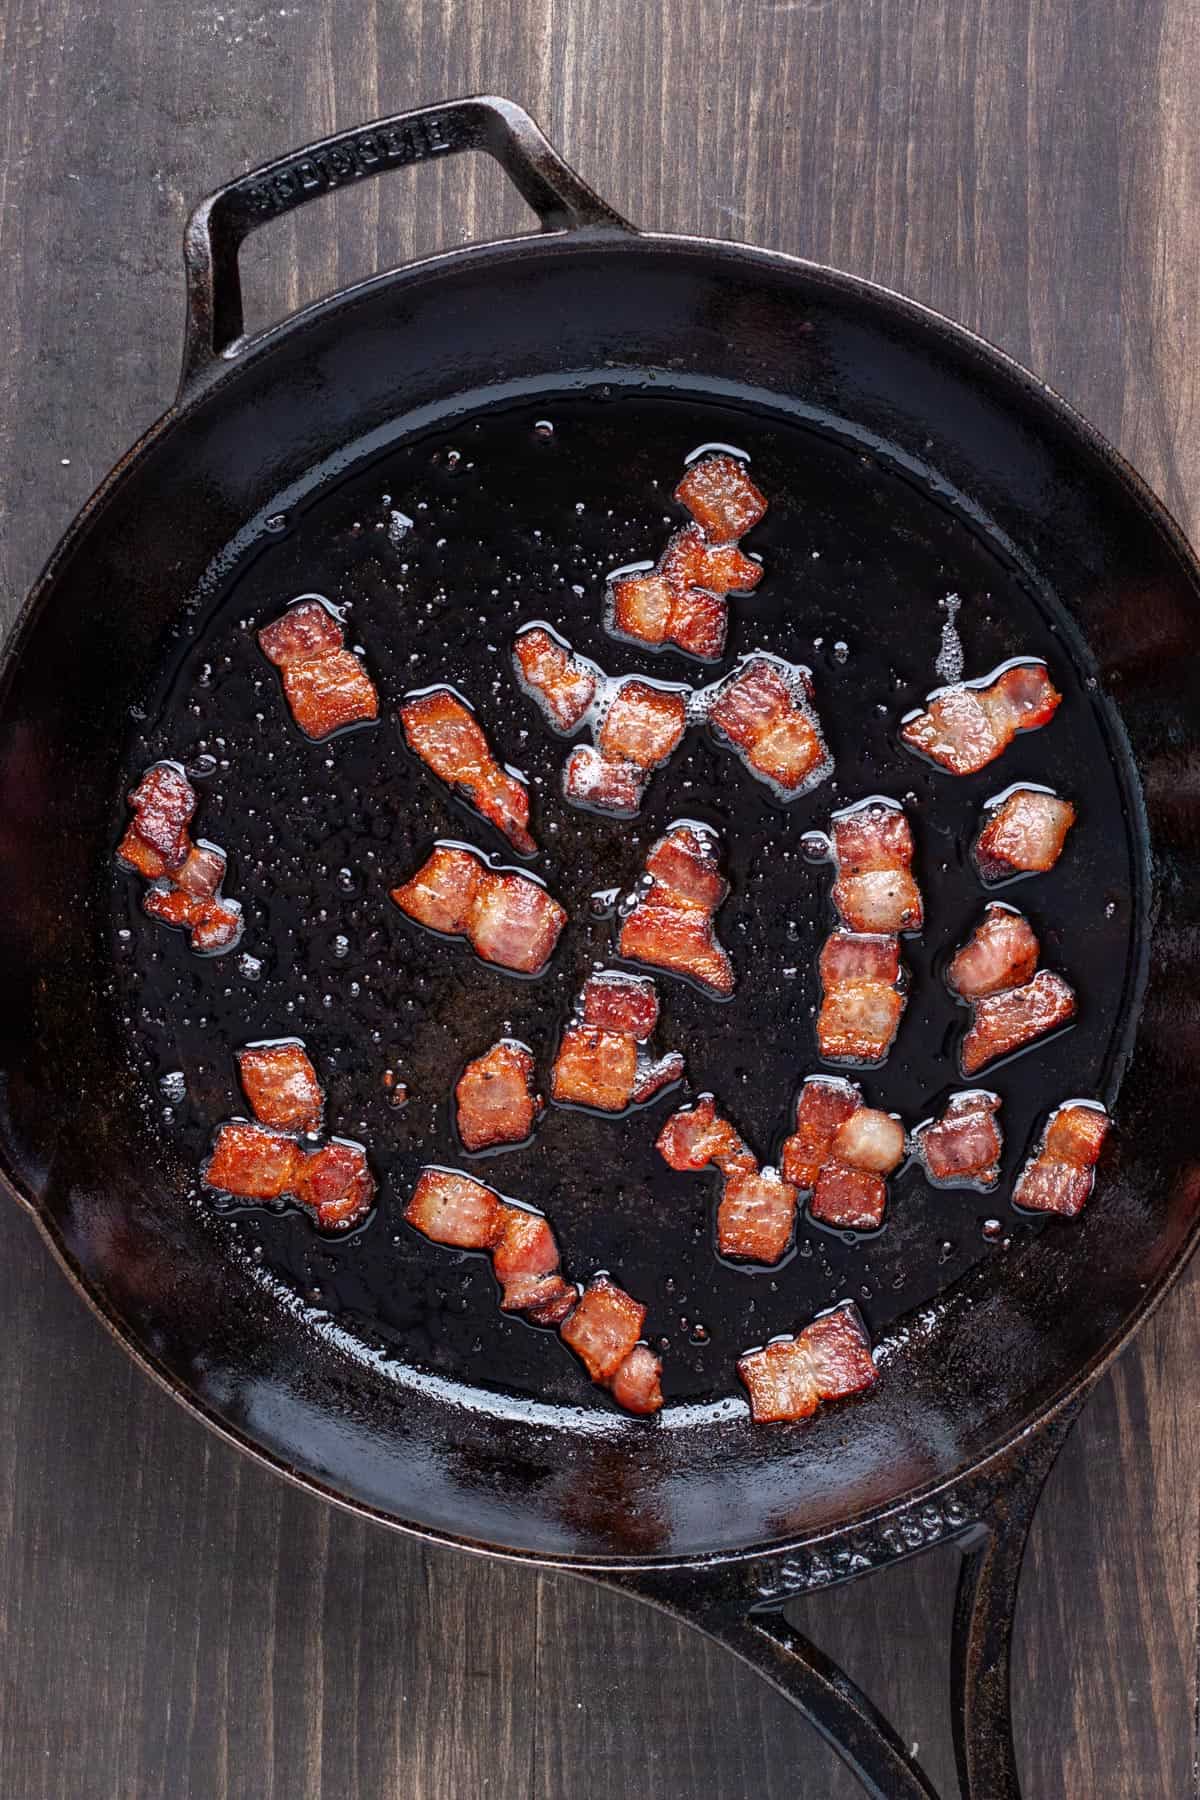 Cooked bacon in a cast iron skillet.